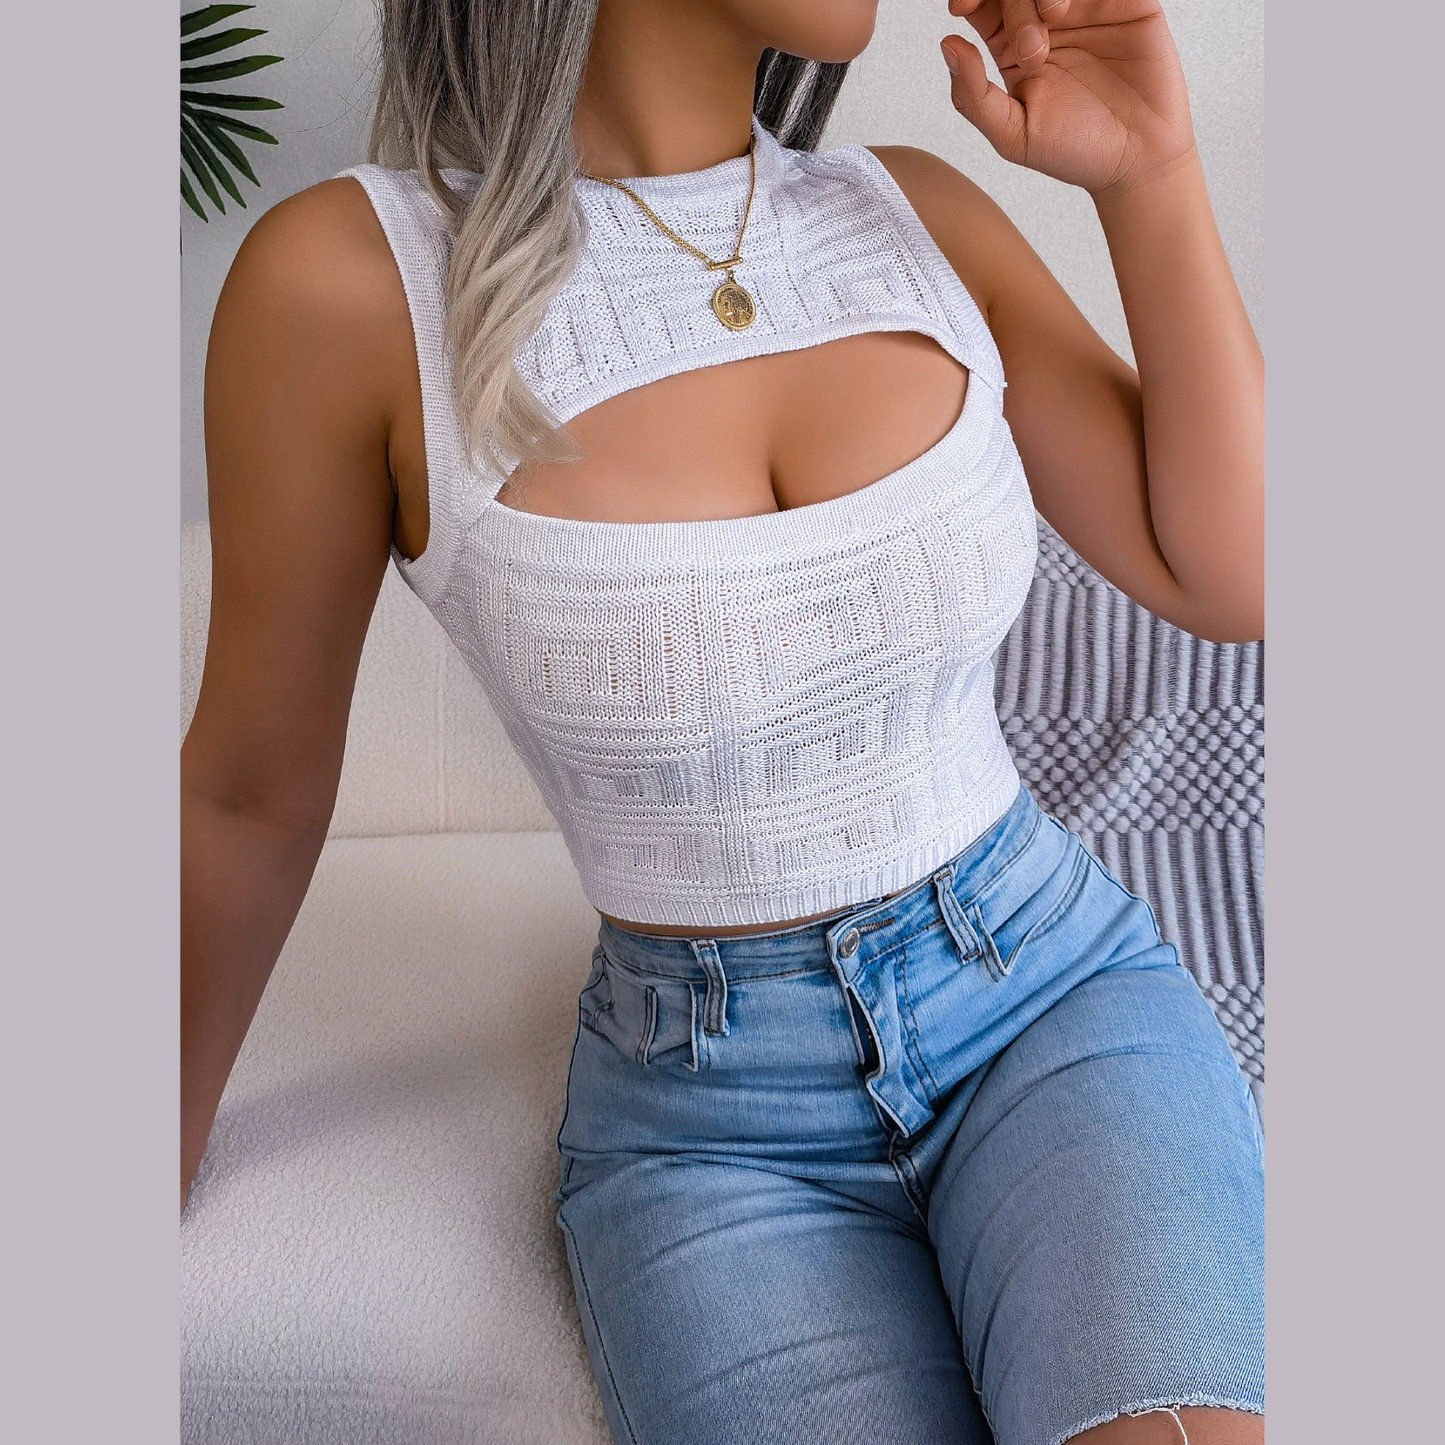 Christiana - White Knitted Cut Out Crop Top